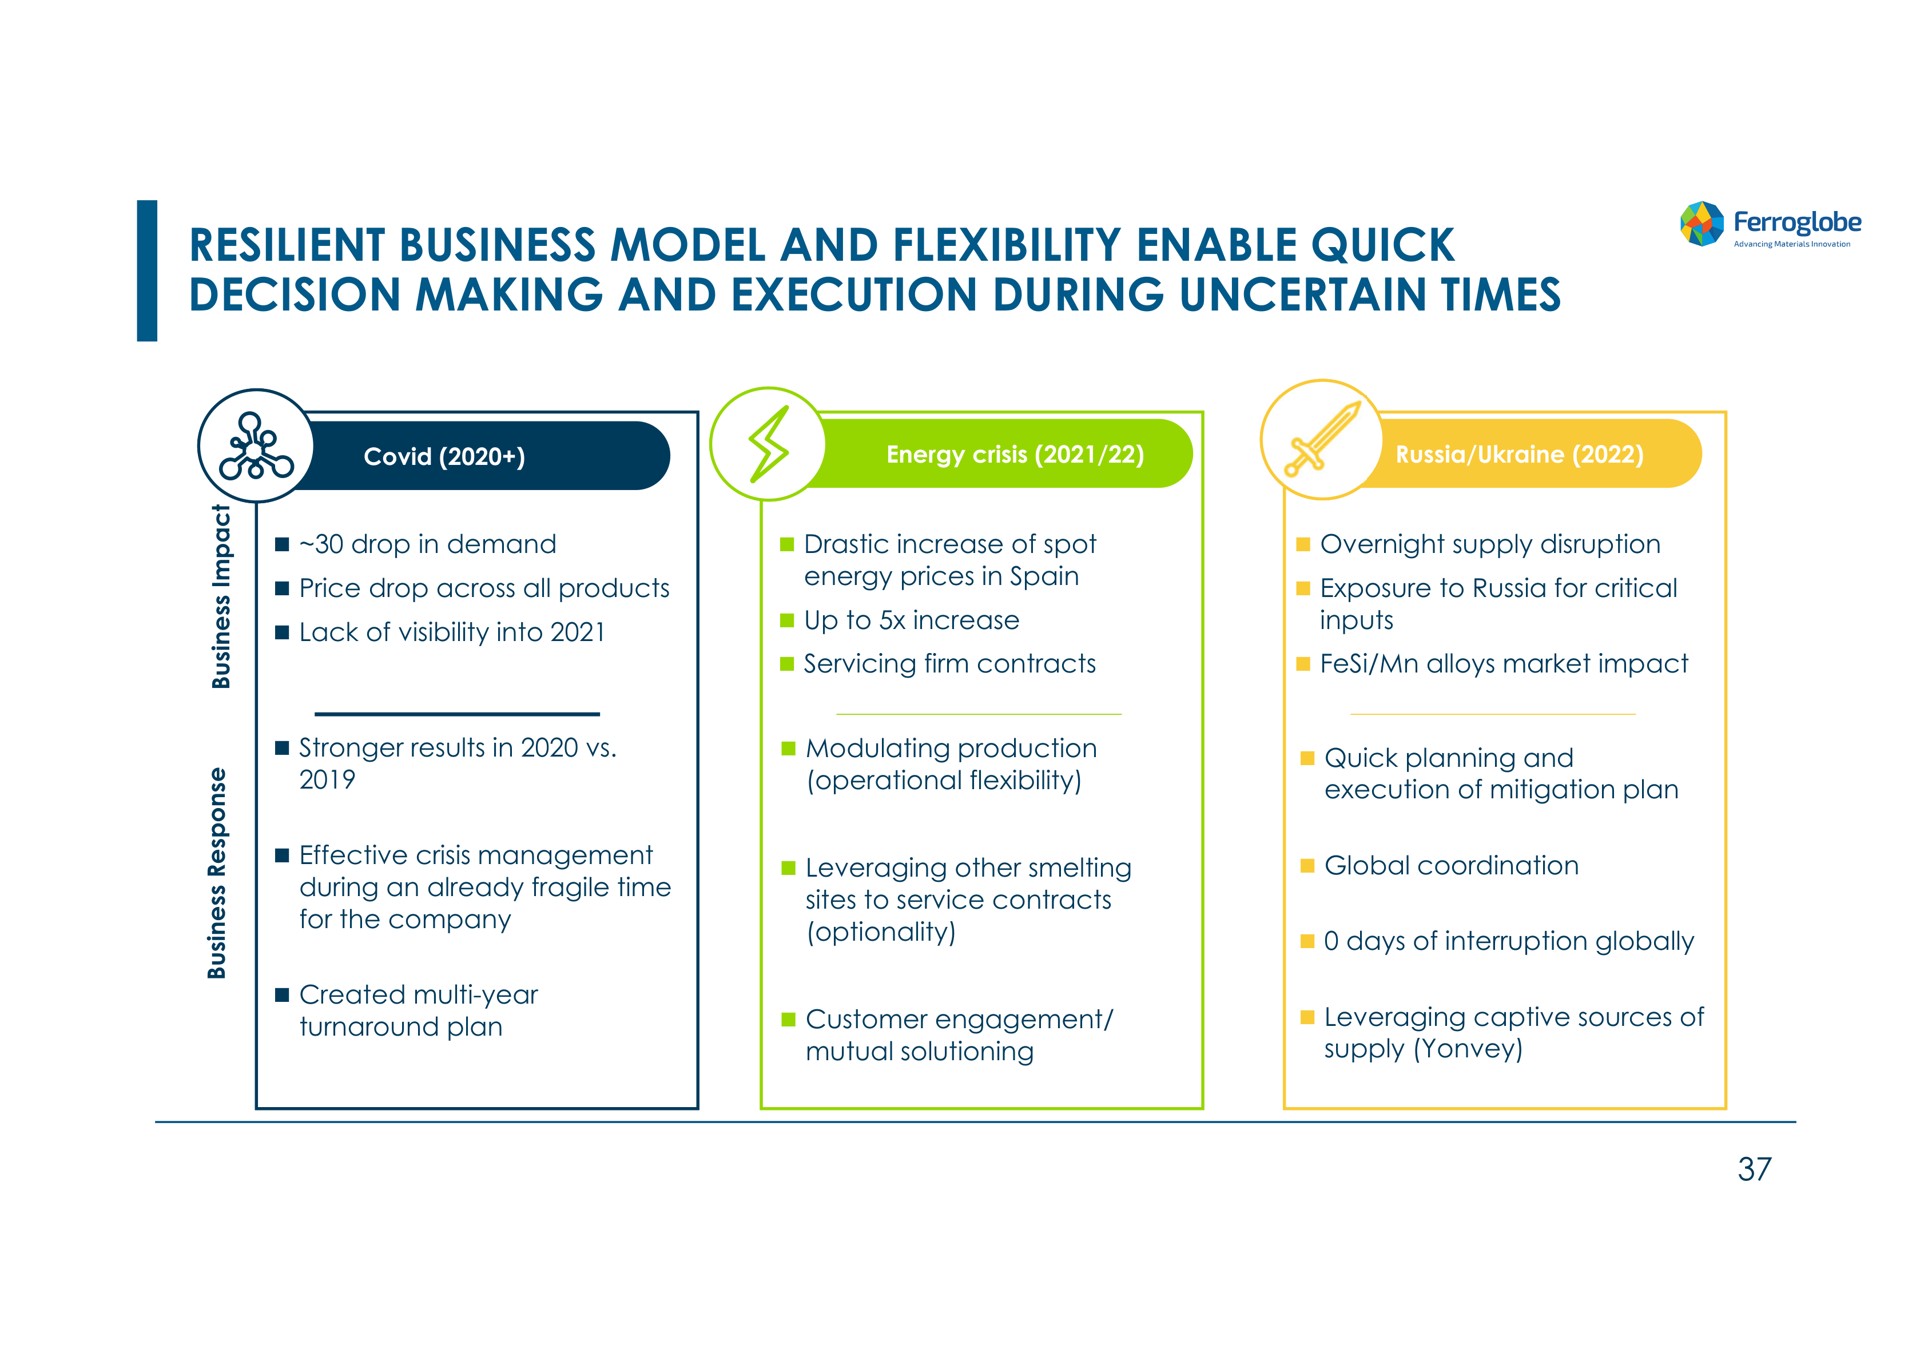 resilient business model and flexibility enable quick decision making and execution during uncertain times | Ferroglobe